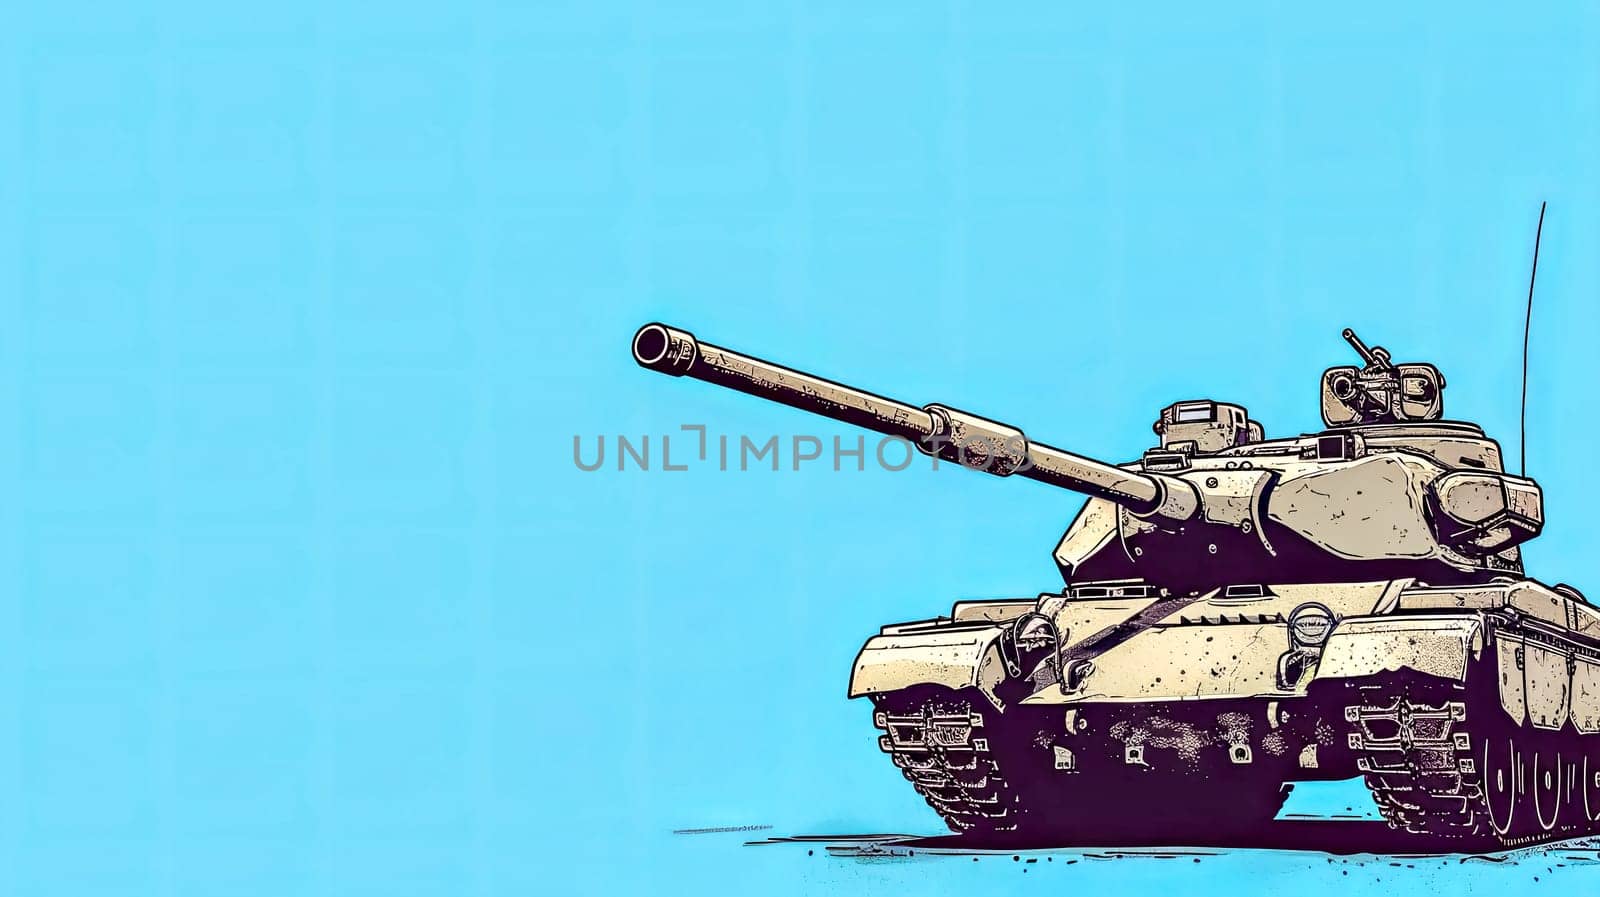 A self-propelled artillery tank depicted on a blue background, representing a combat vehicle capable of both land and water operations.